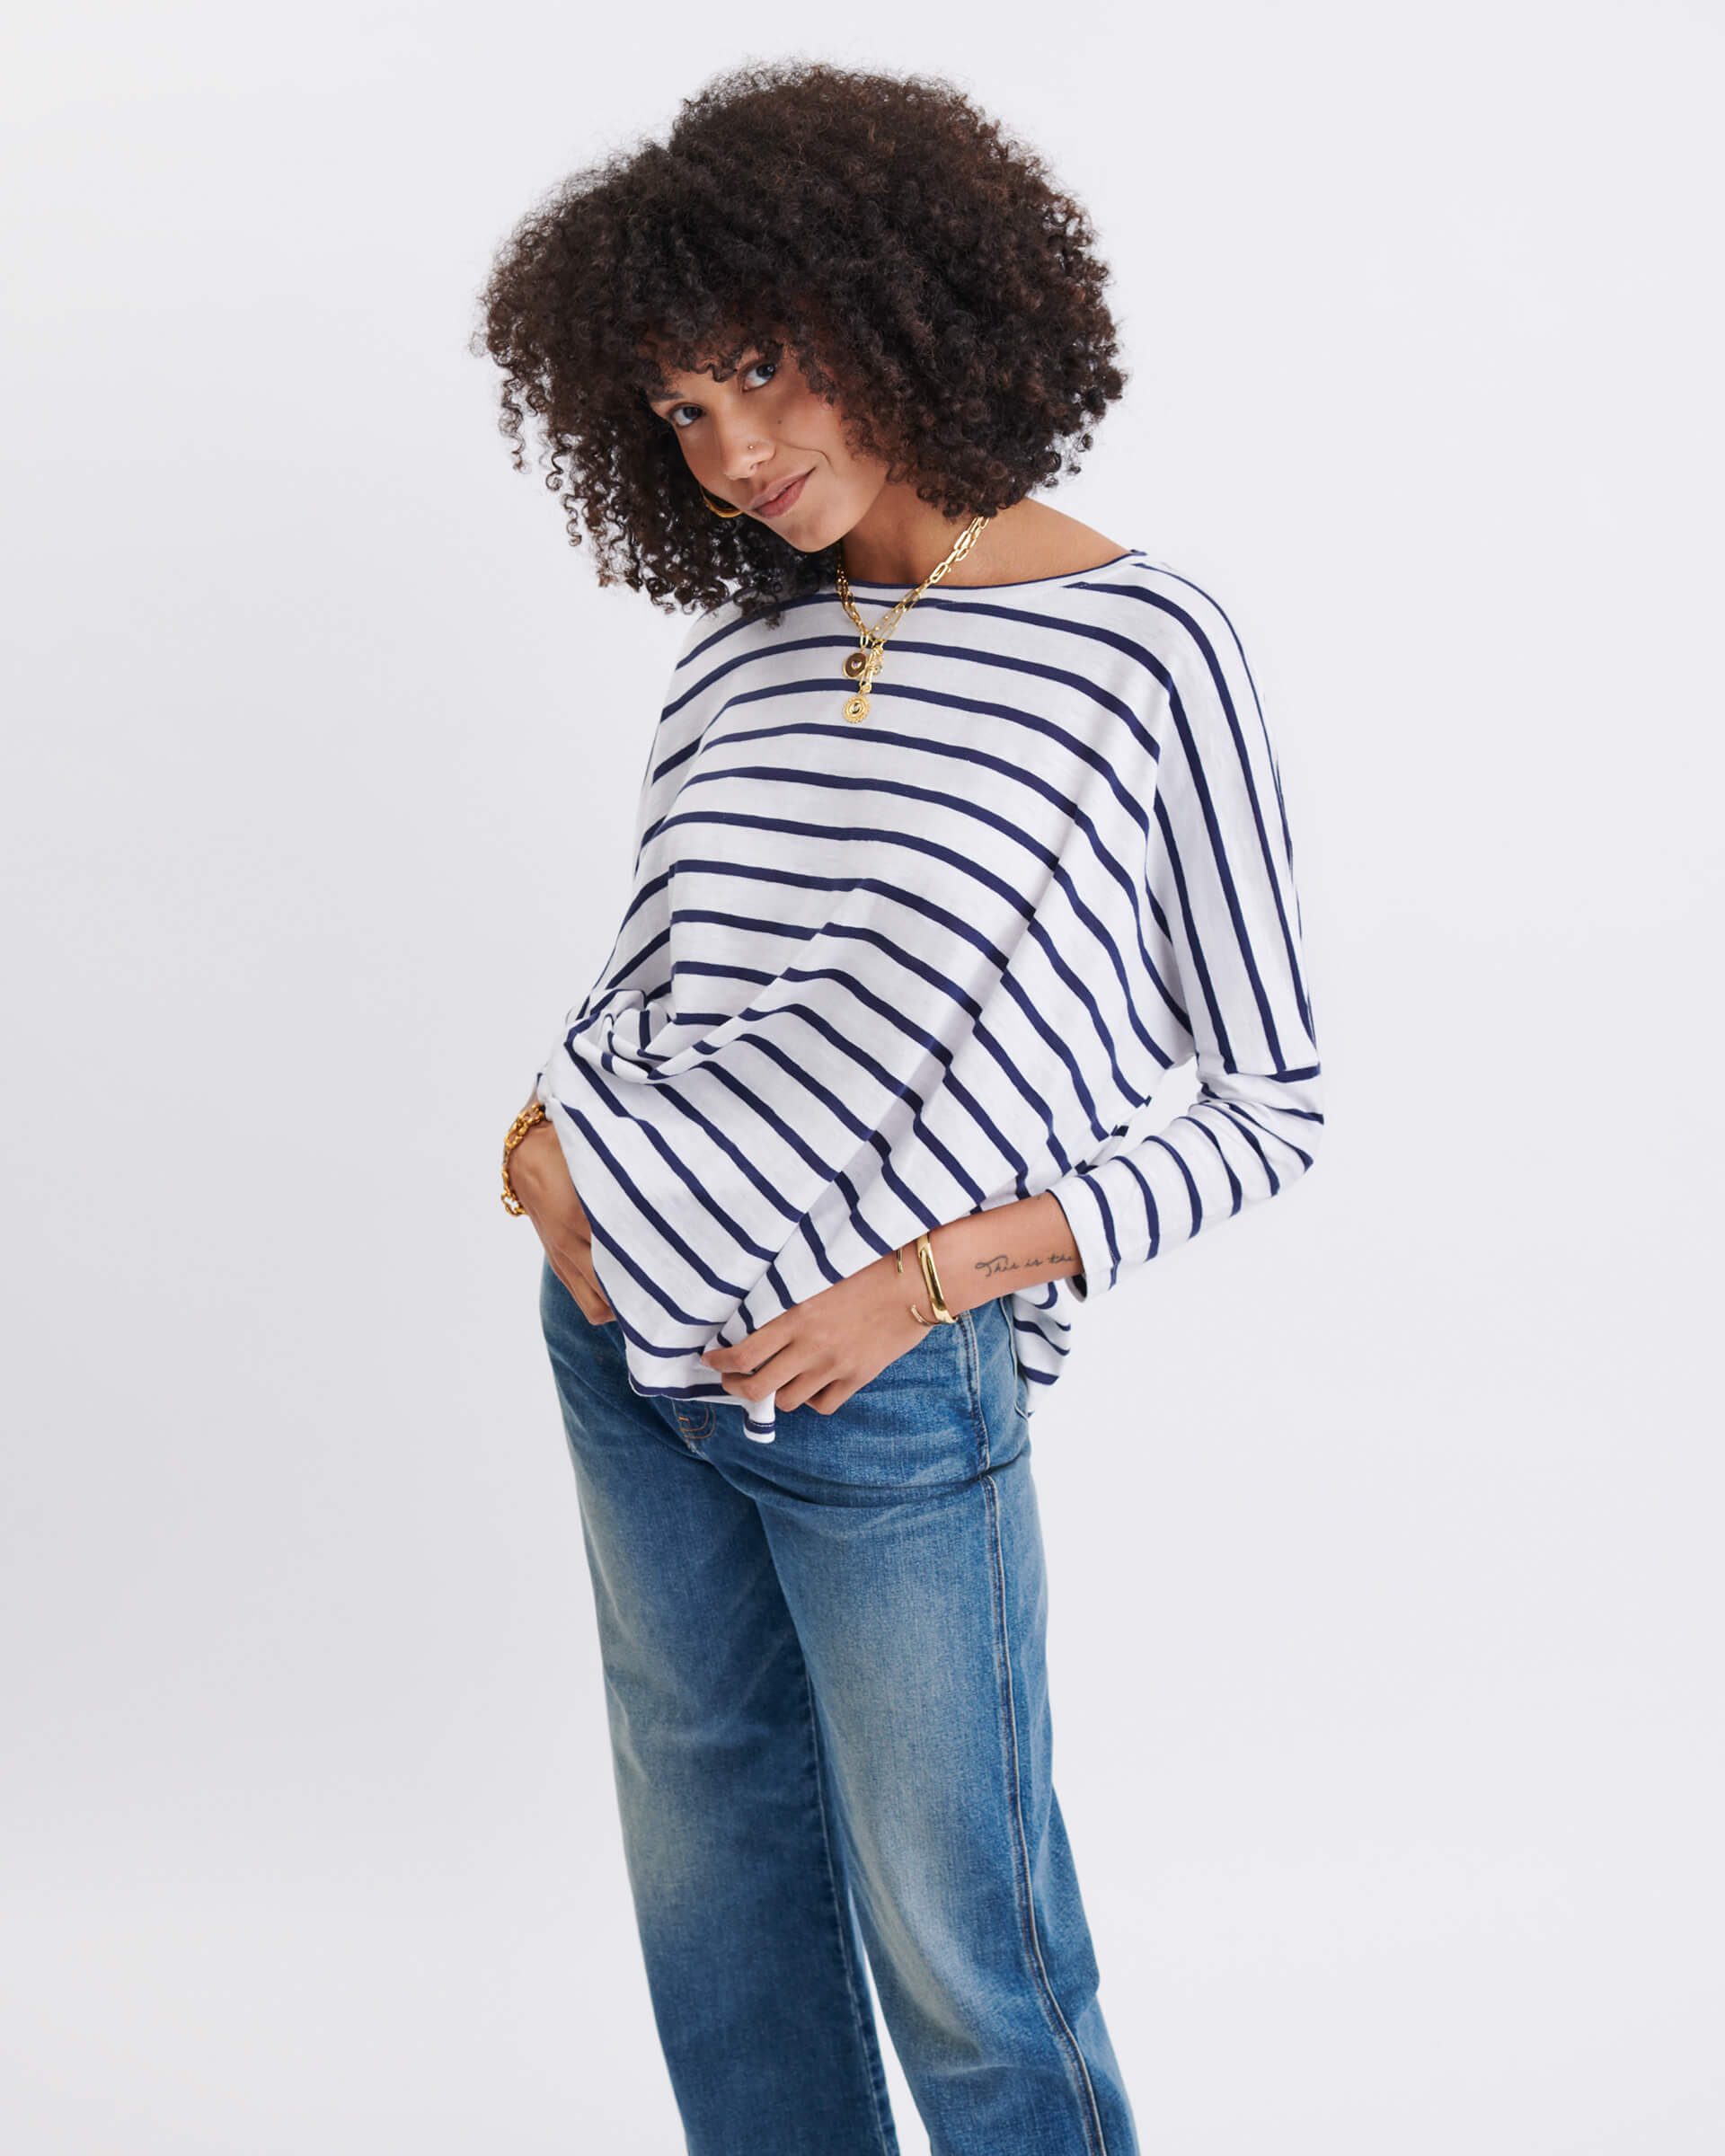 Women's One Size Tee in Navy Stripes Chest View